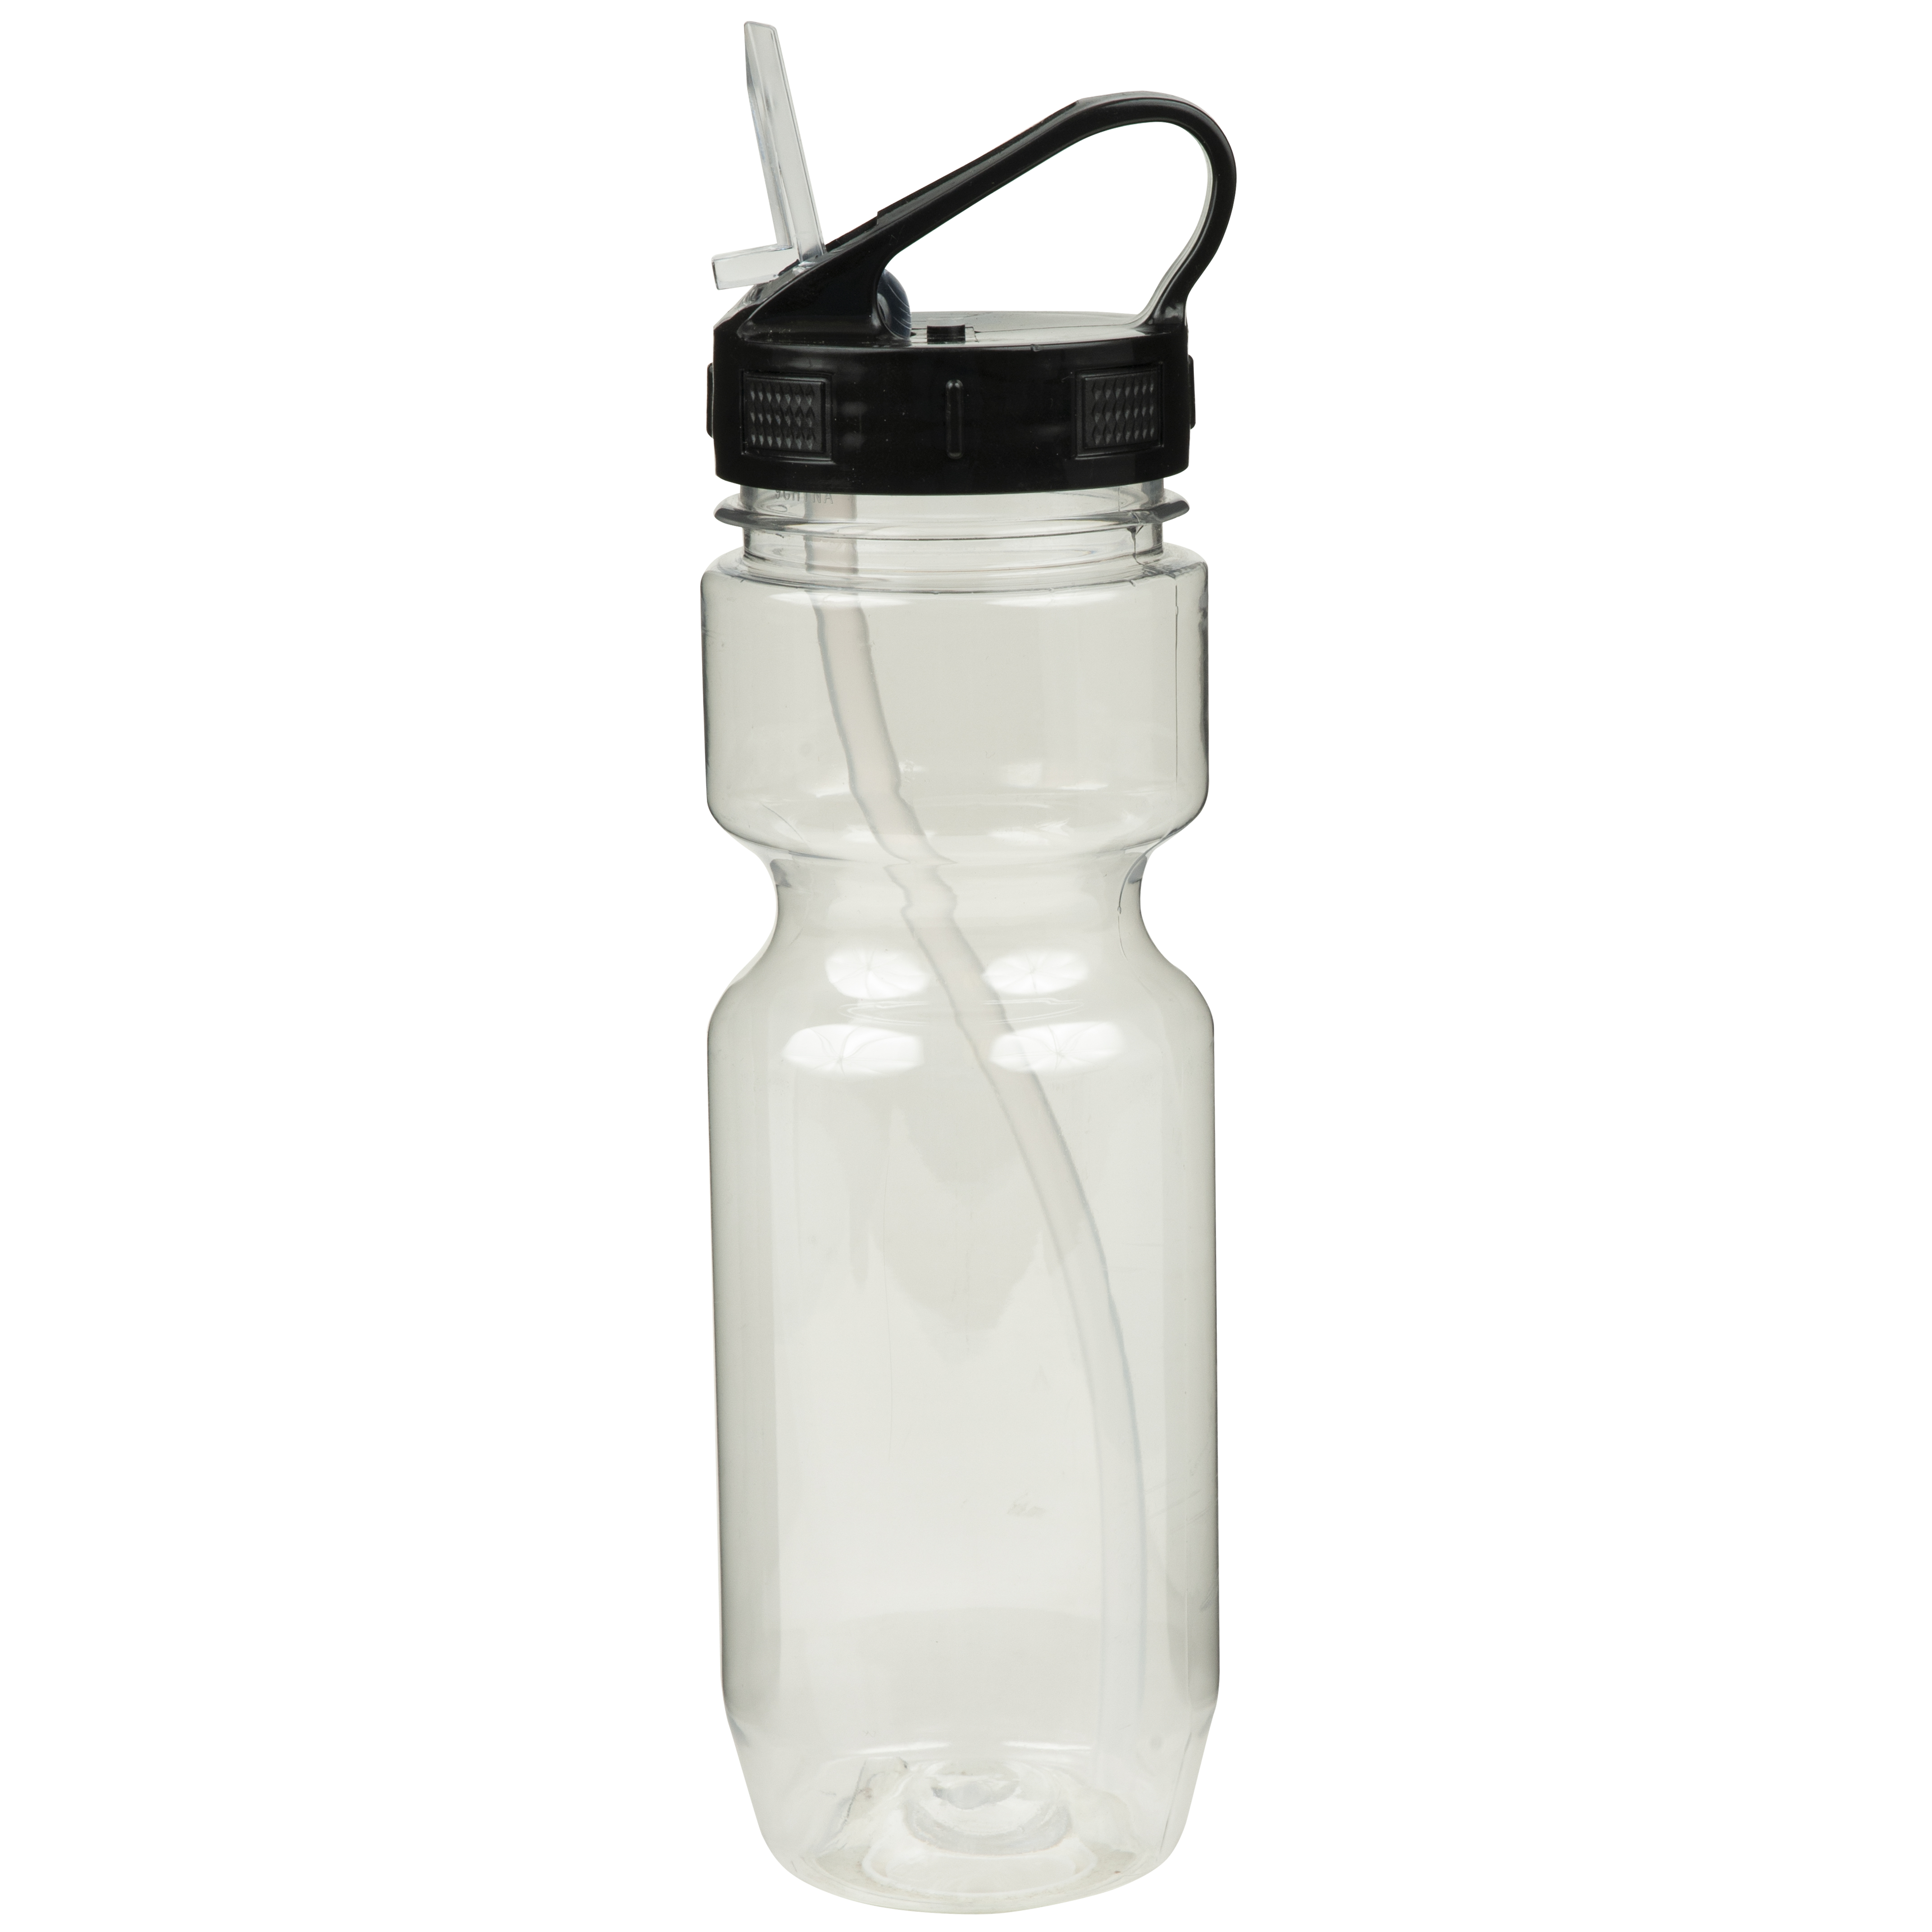 Imprinted Sports Water Bottles with Straw (22 Oz.)